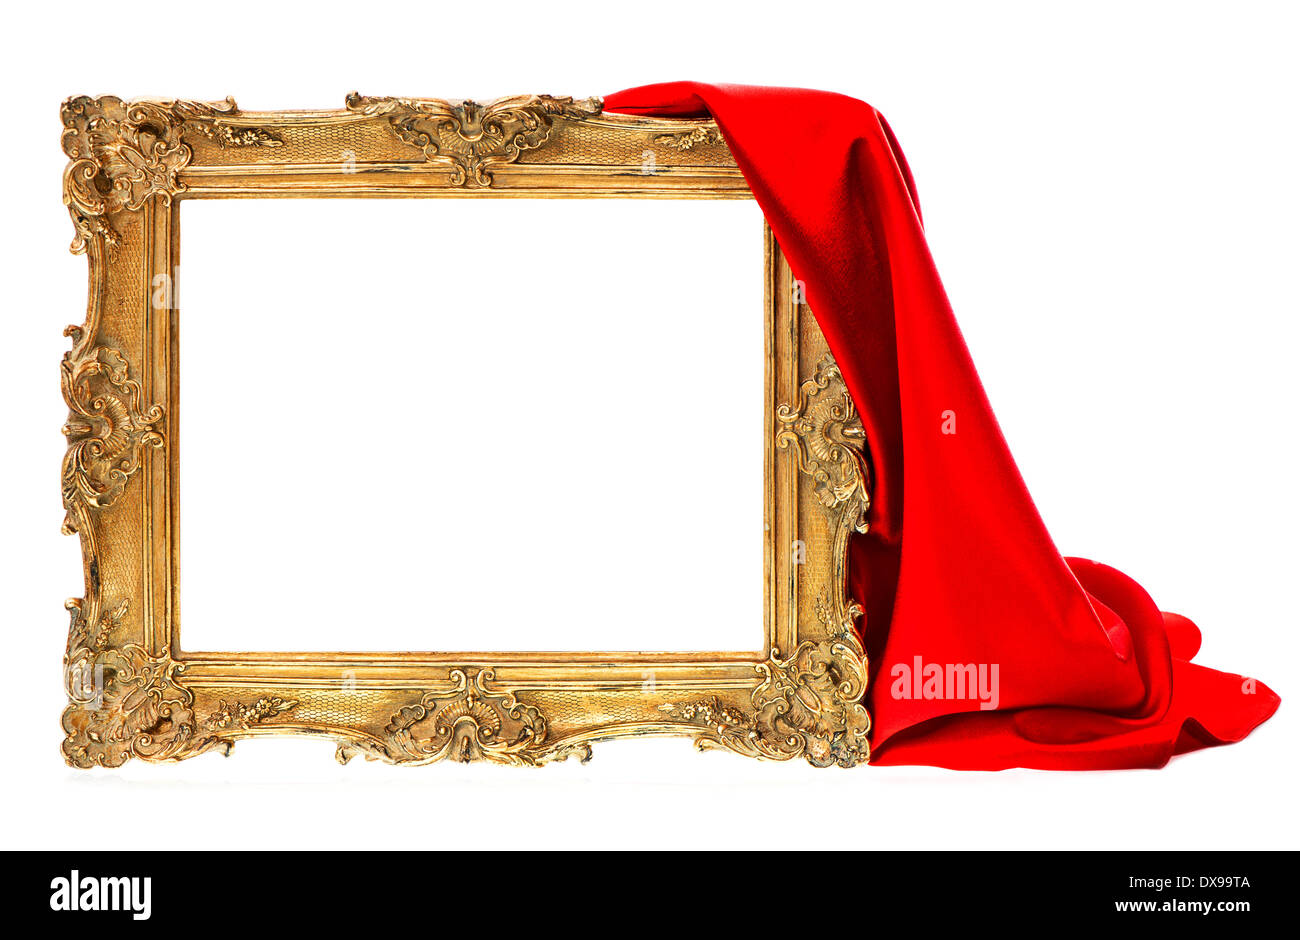 golden wooden frame with red silk decoration isolated on white background Stock Photo